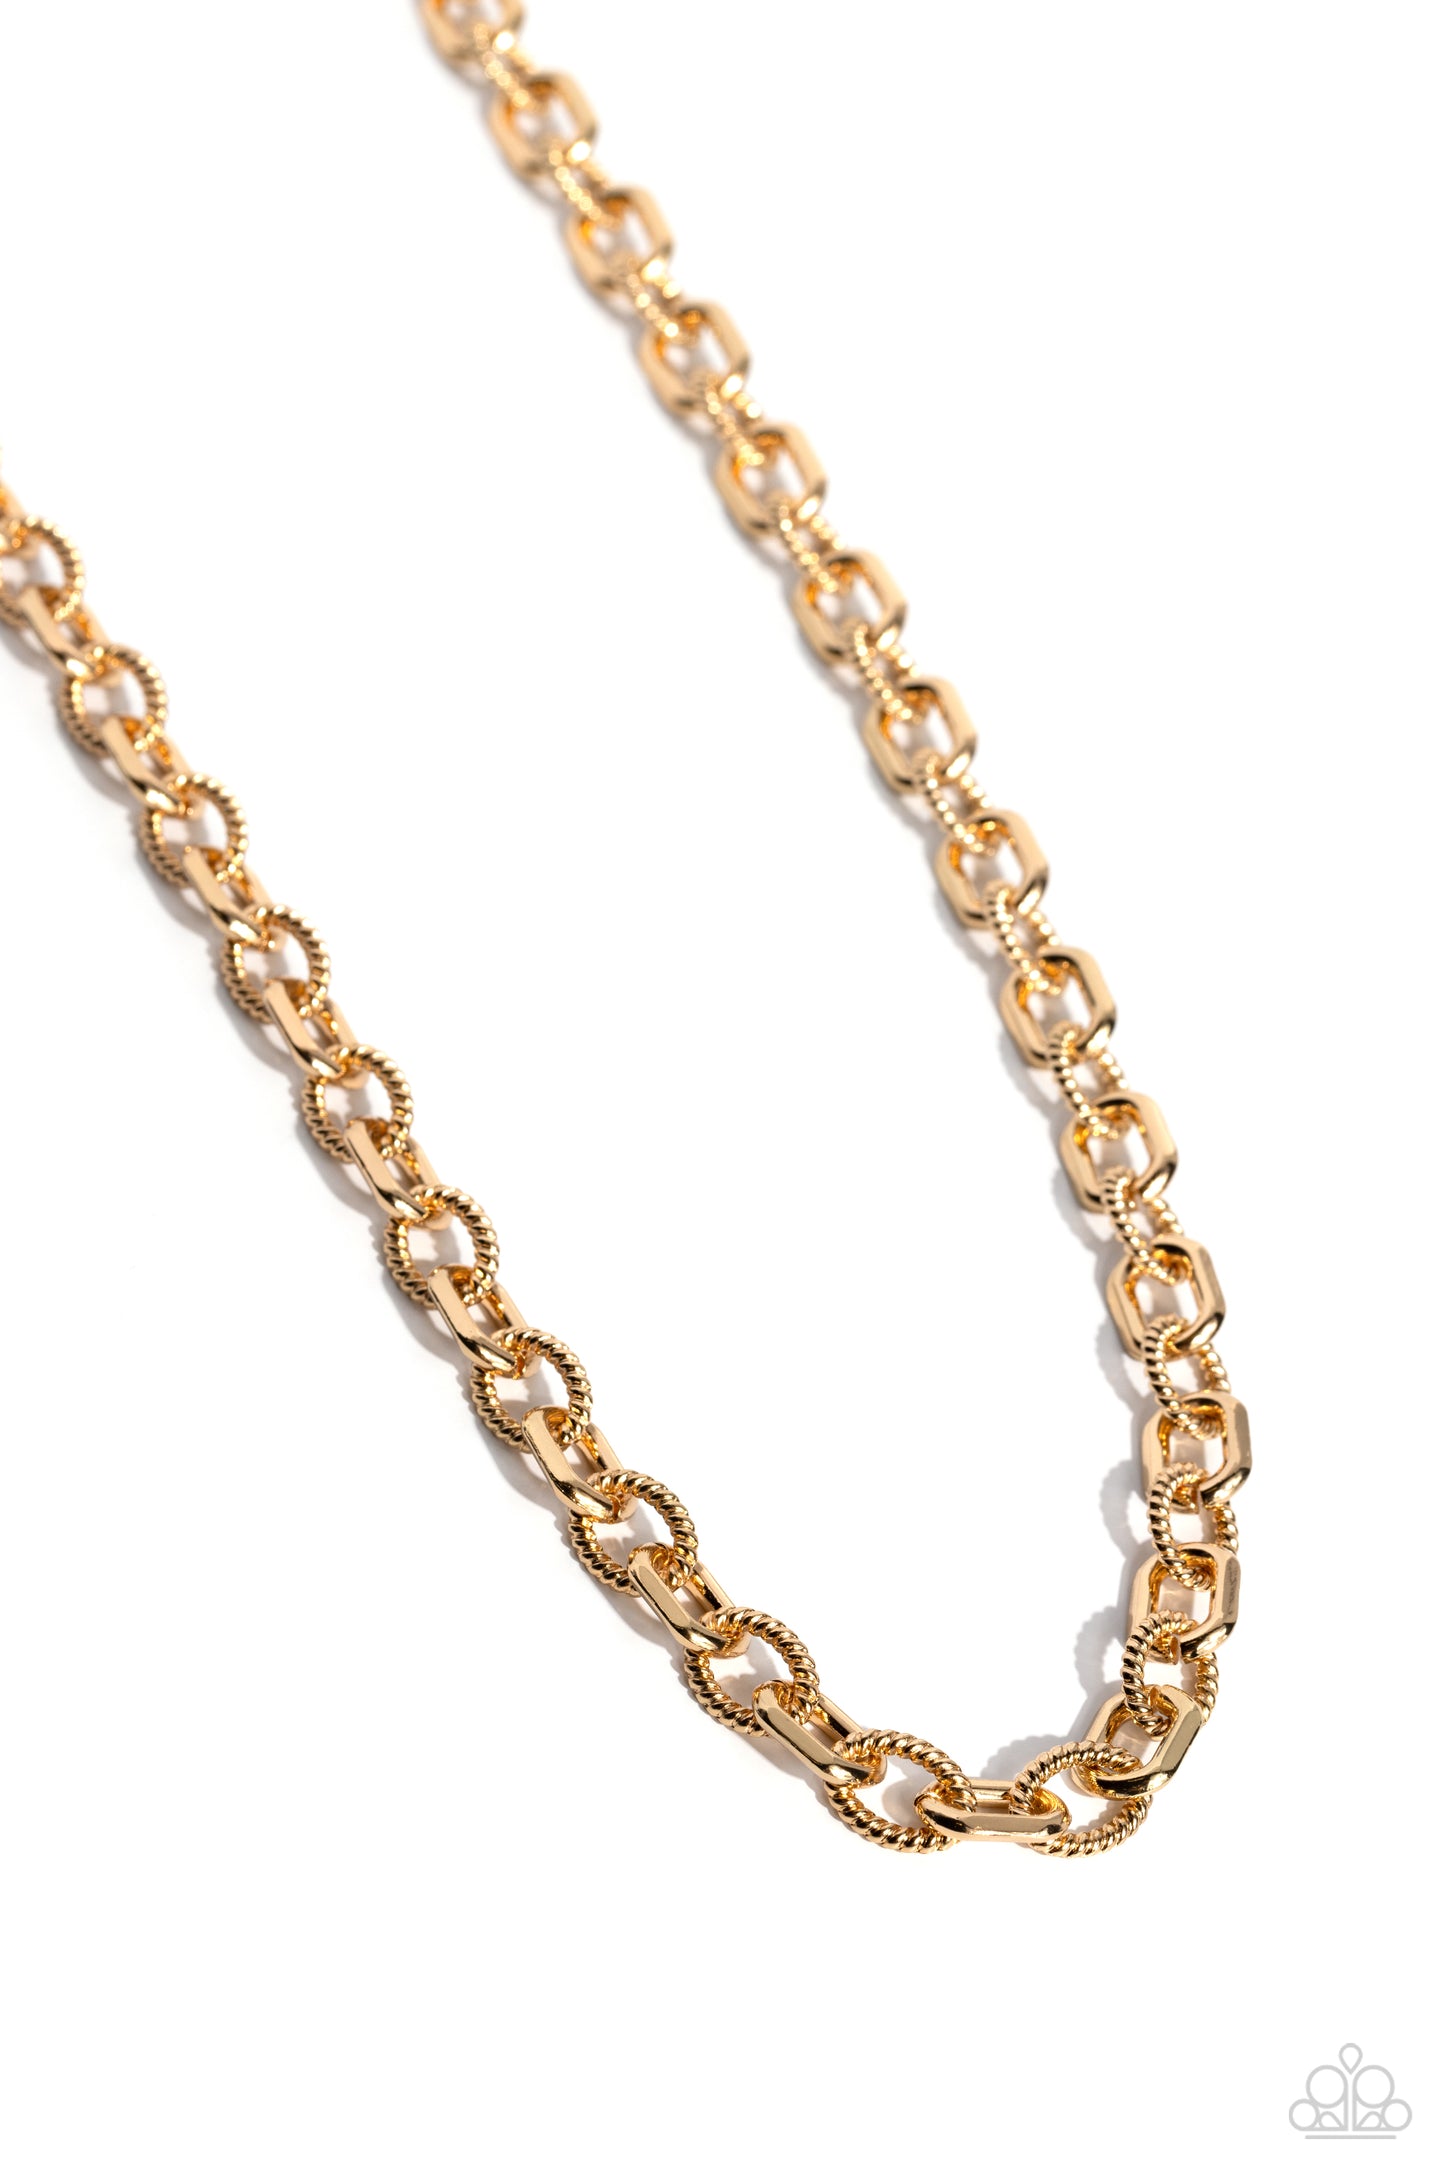 Textured gold hoops and angular oval gold links boldly connect across the chest, resulting in an intense industrial statement piece. Features an adjustable clasp closure.  Sold as one individual necklace.   Get The Complete Look! Bracelet: "Double Clutch - Gold" (Sold Separately)